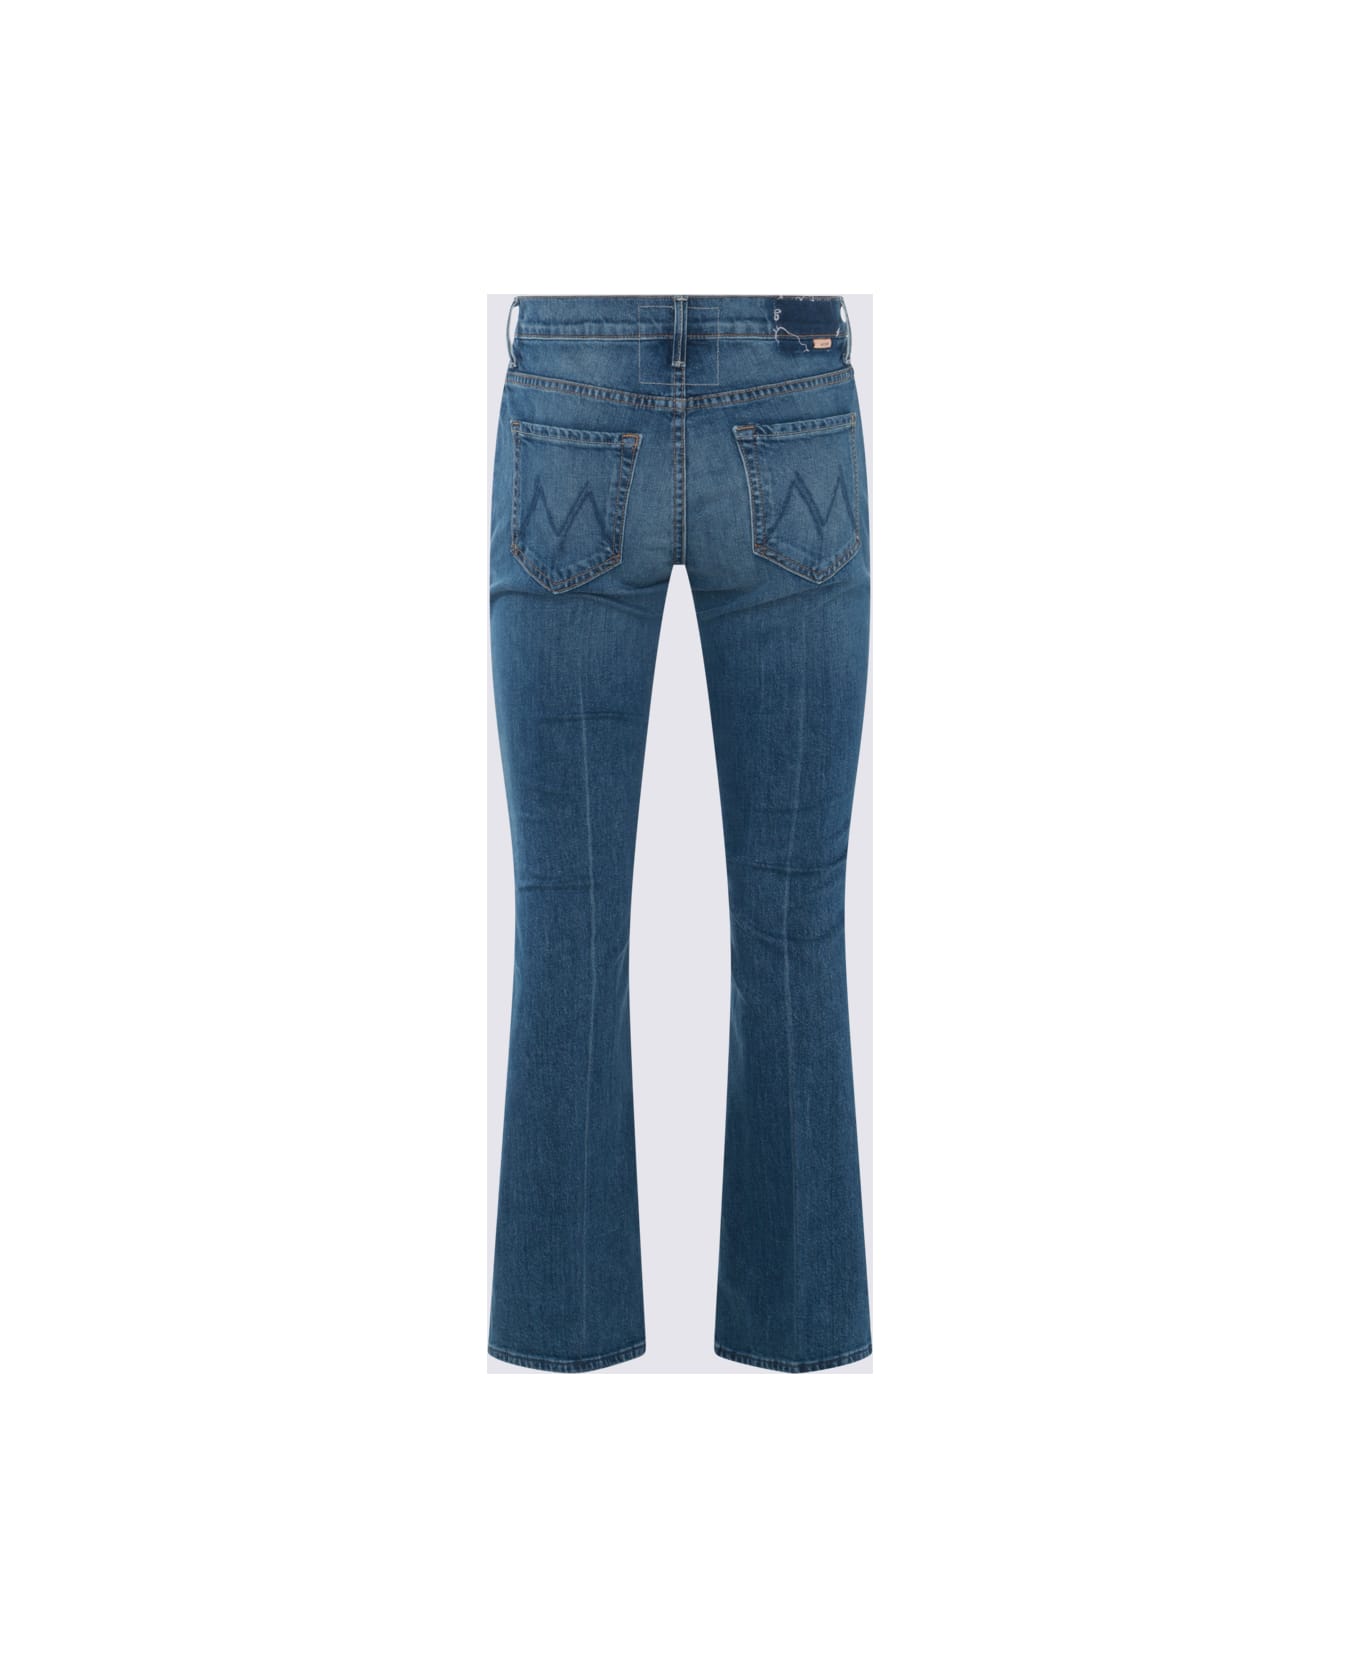 Mother Dark Blue Cotton Blend Jeans - ITS A SMALL WORLD